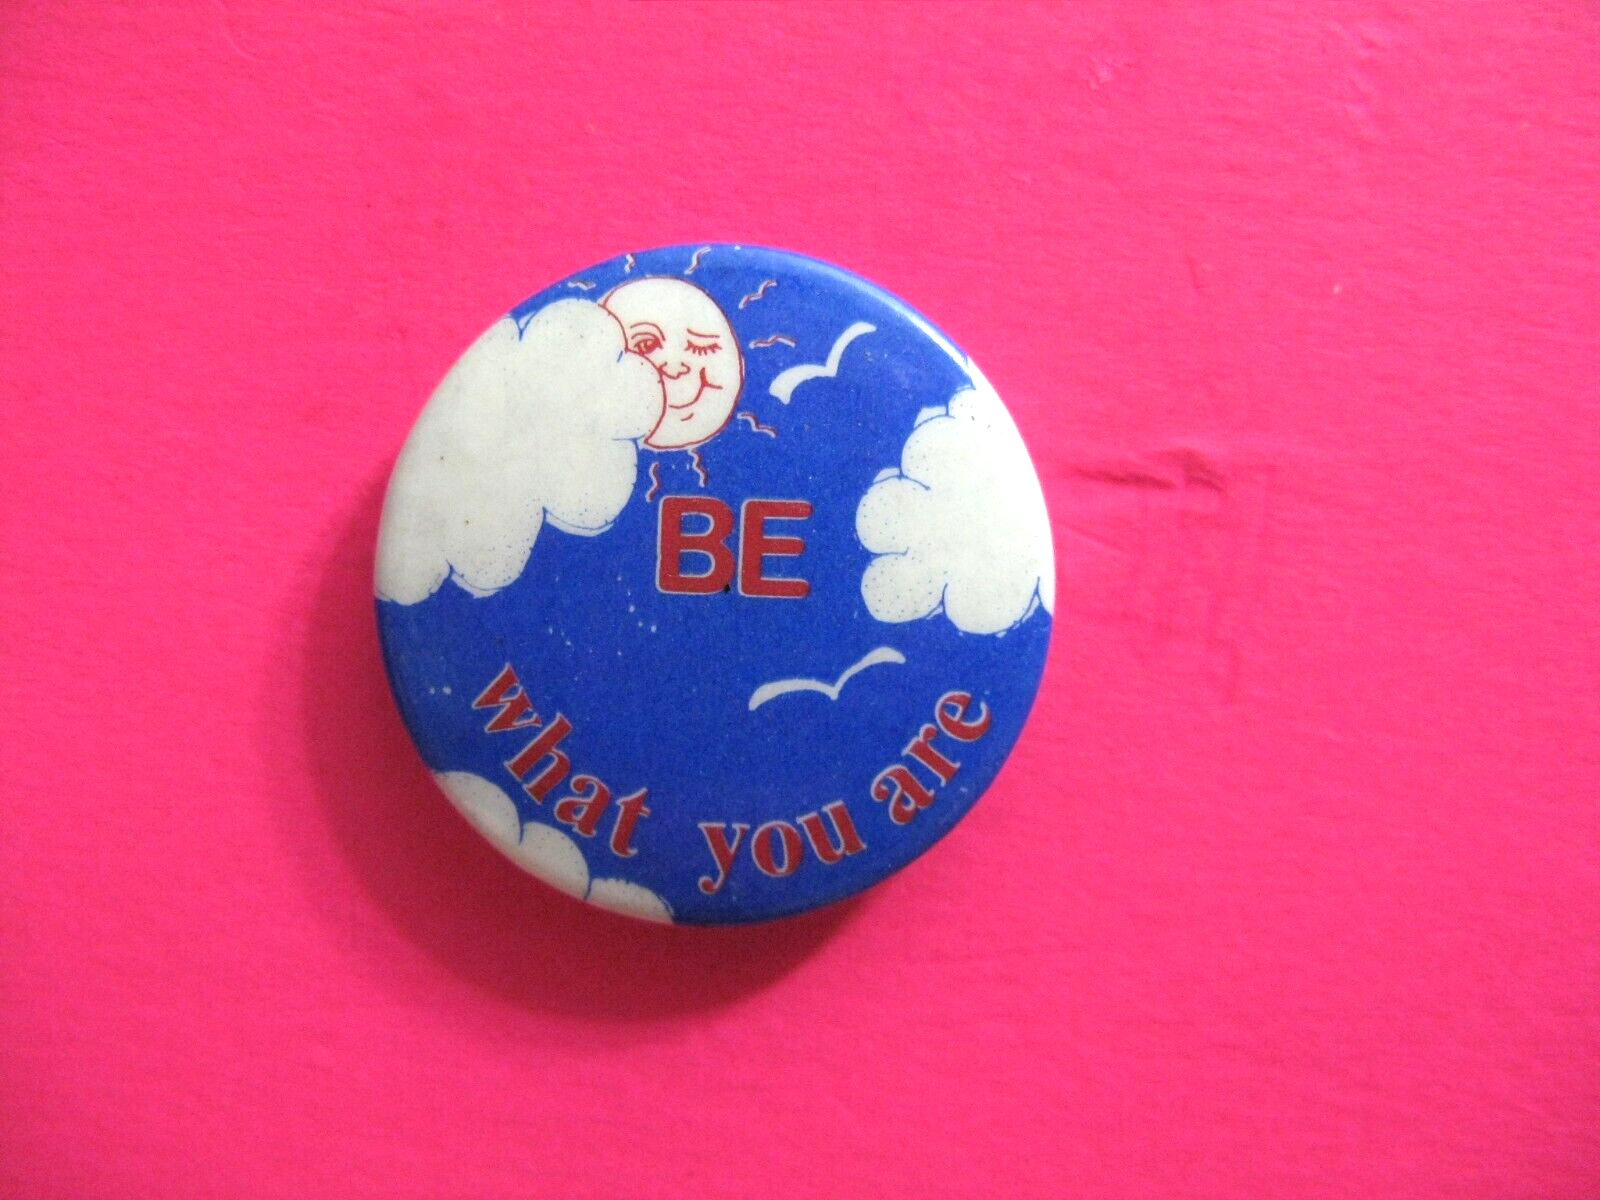 1980\'s SAYINGS VINTAGE BUTTON PIN BADGE UK IMPORT    BE.......         A